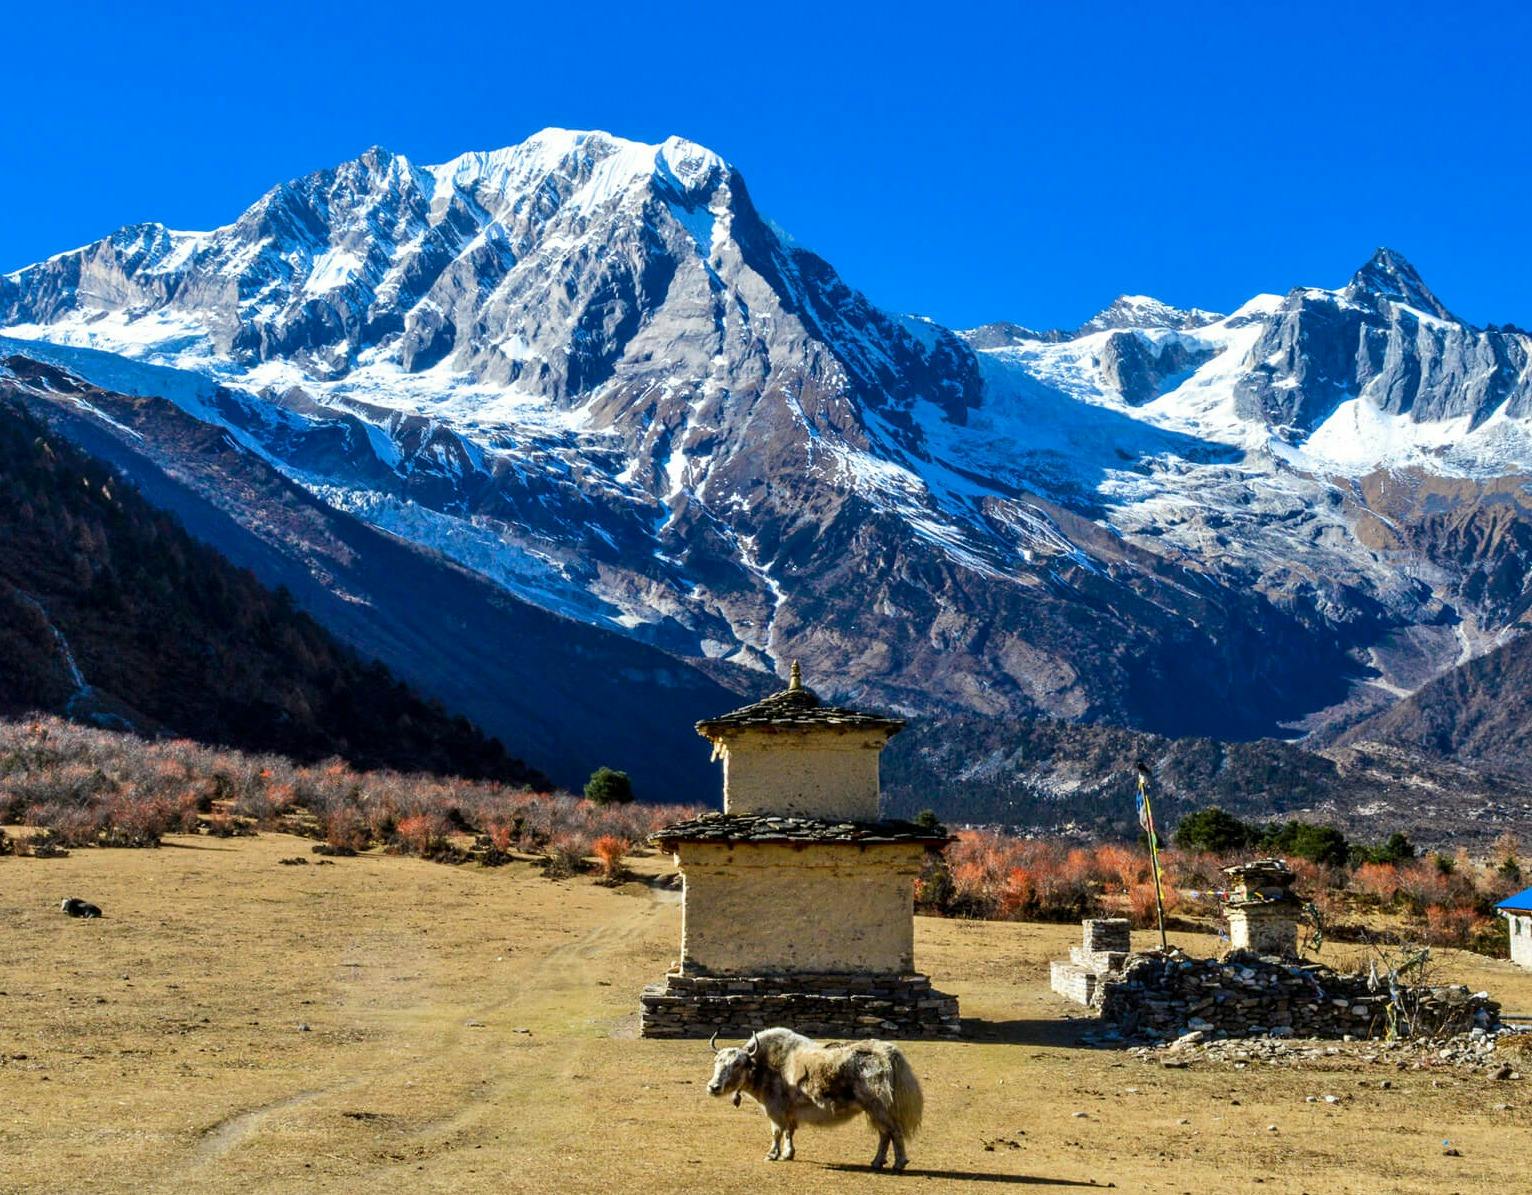 The Best Treks in Nepal - 12 epic hikes in the Himalayas!